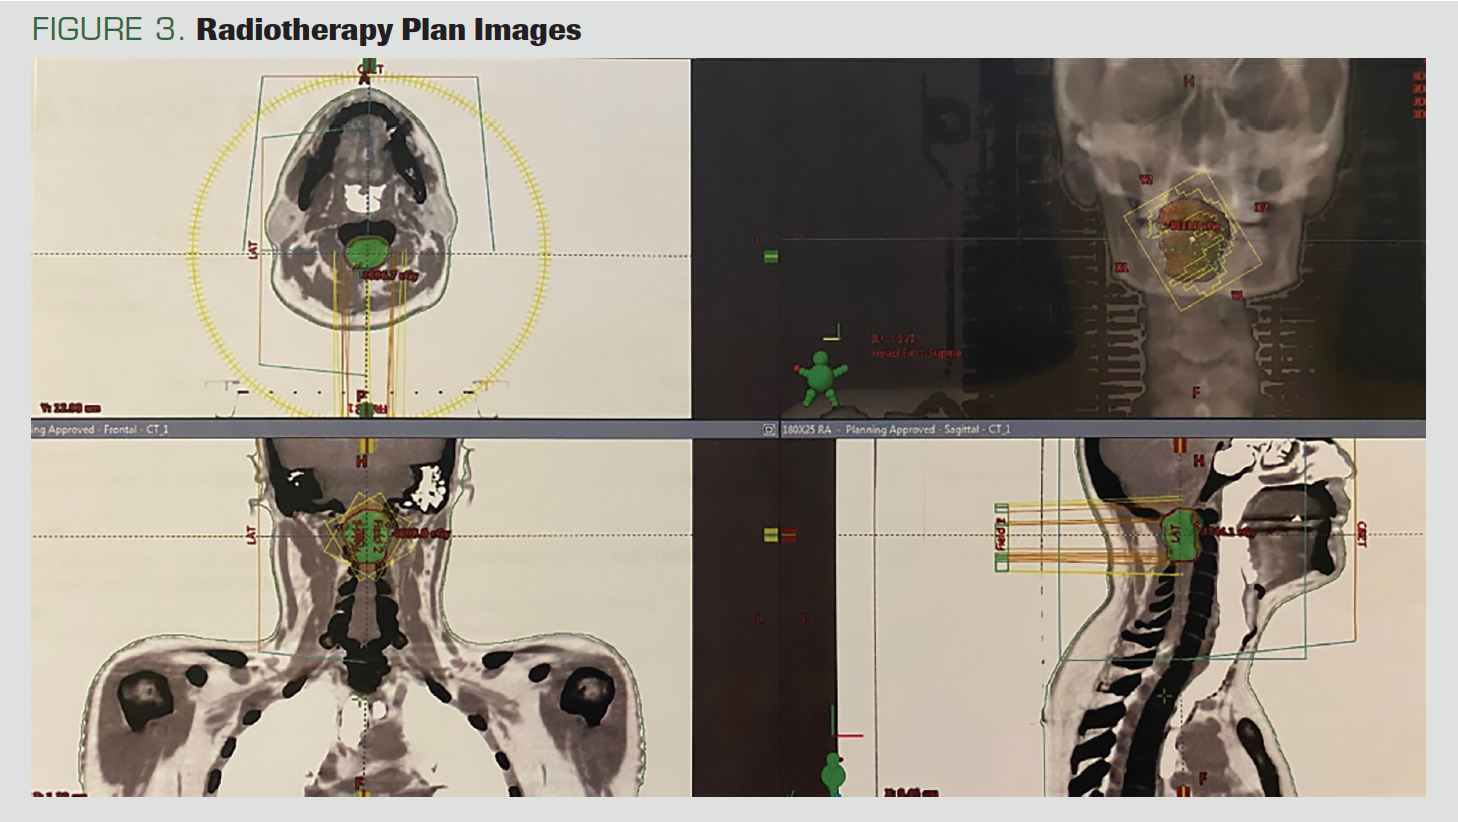 FIGURE 3. Radiotherapy Plan Images